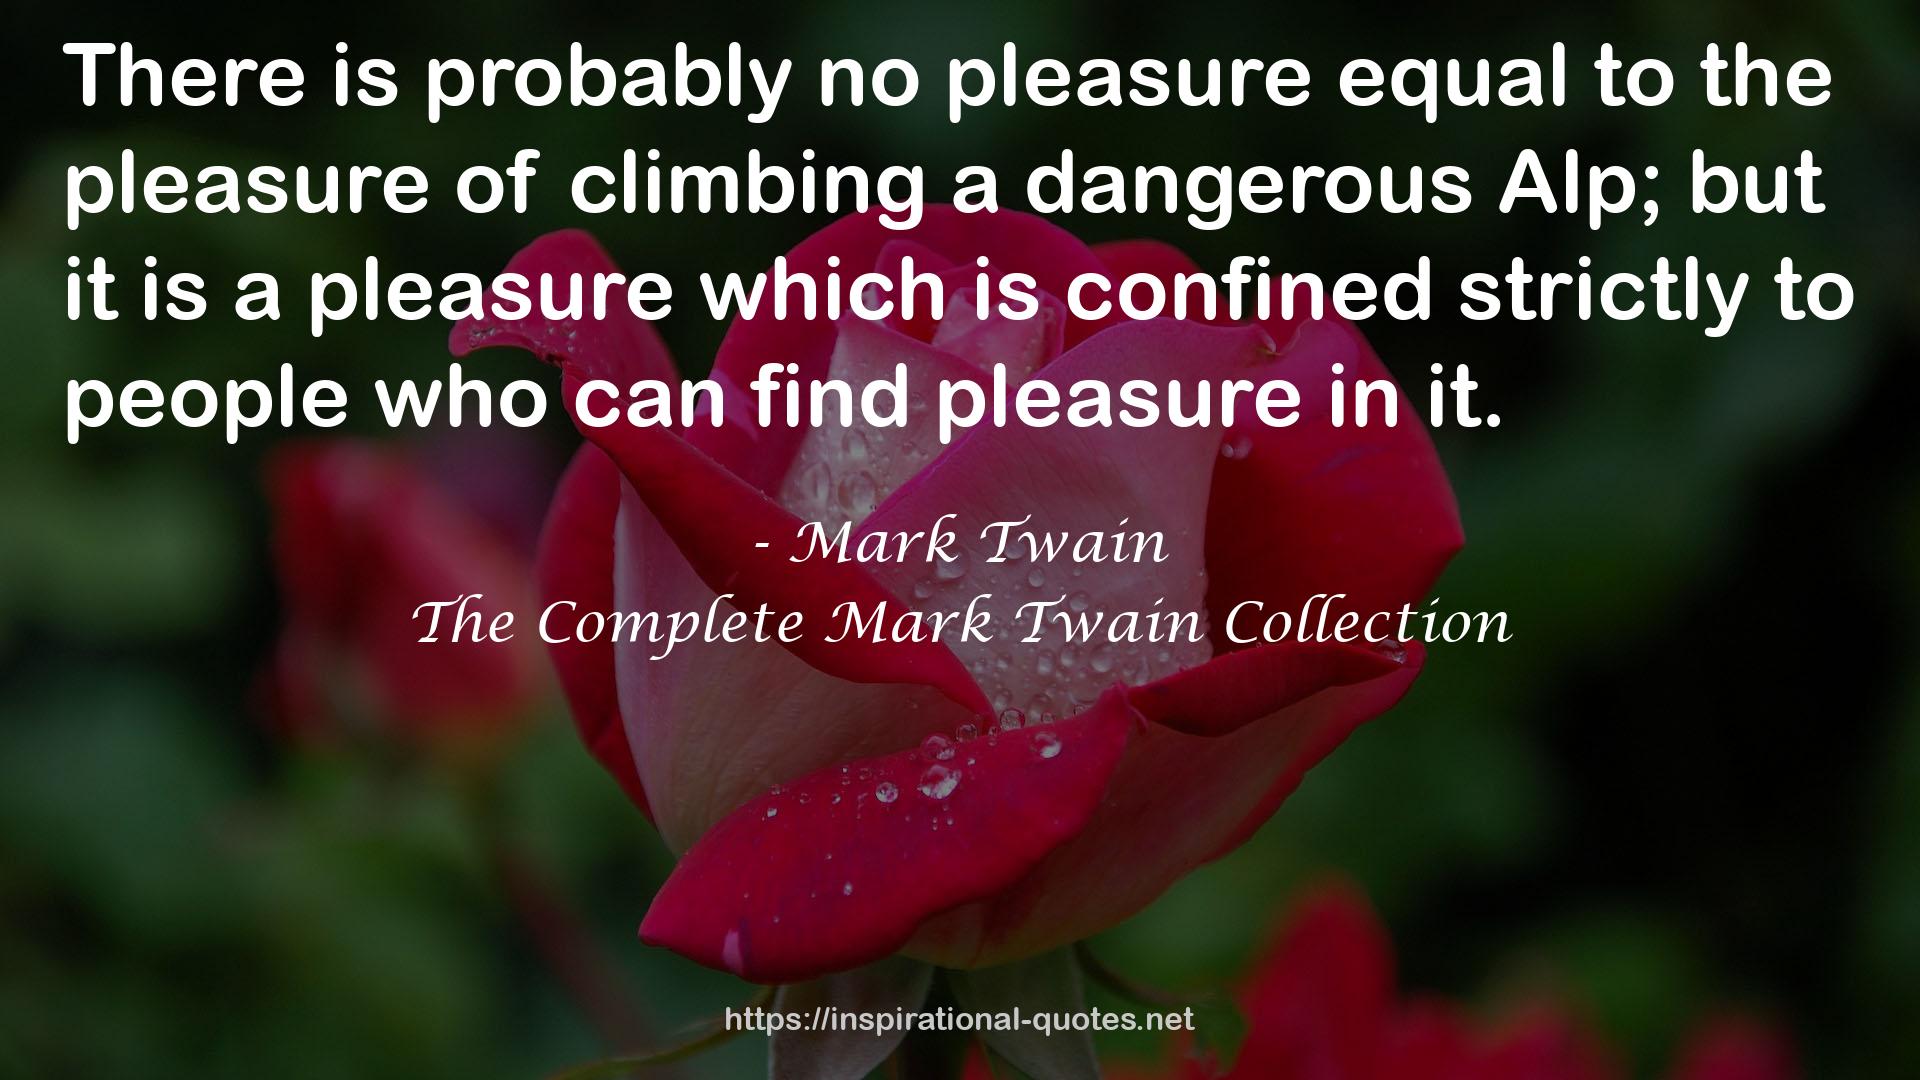 The Complete Mark Twain Collection QUOTES